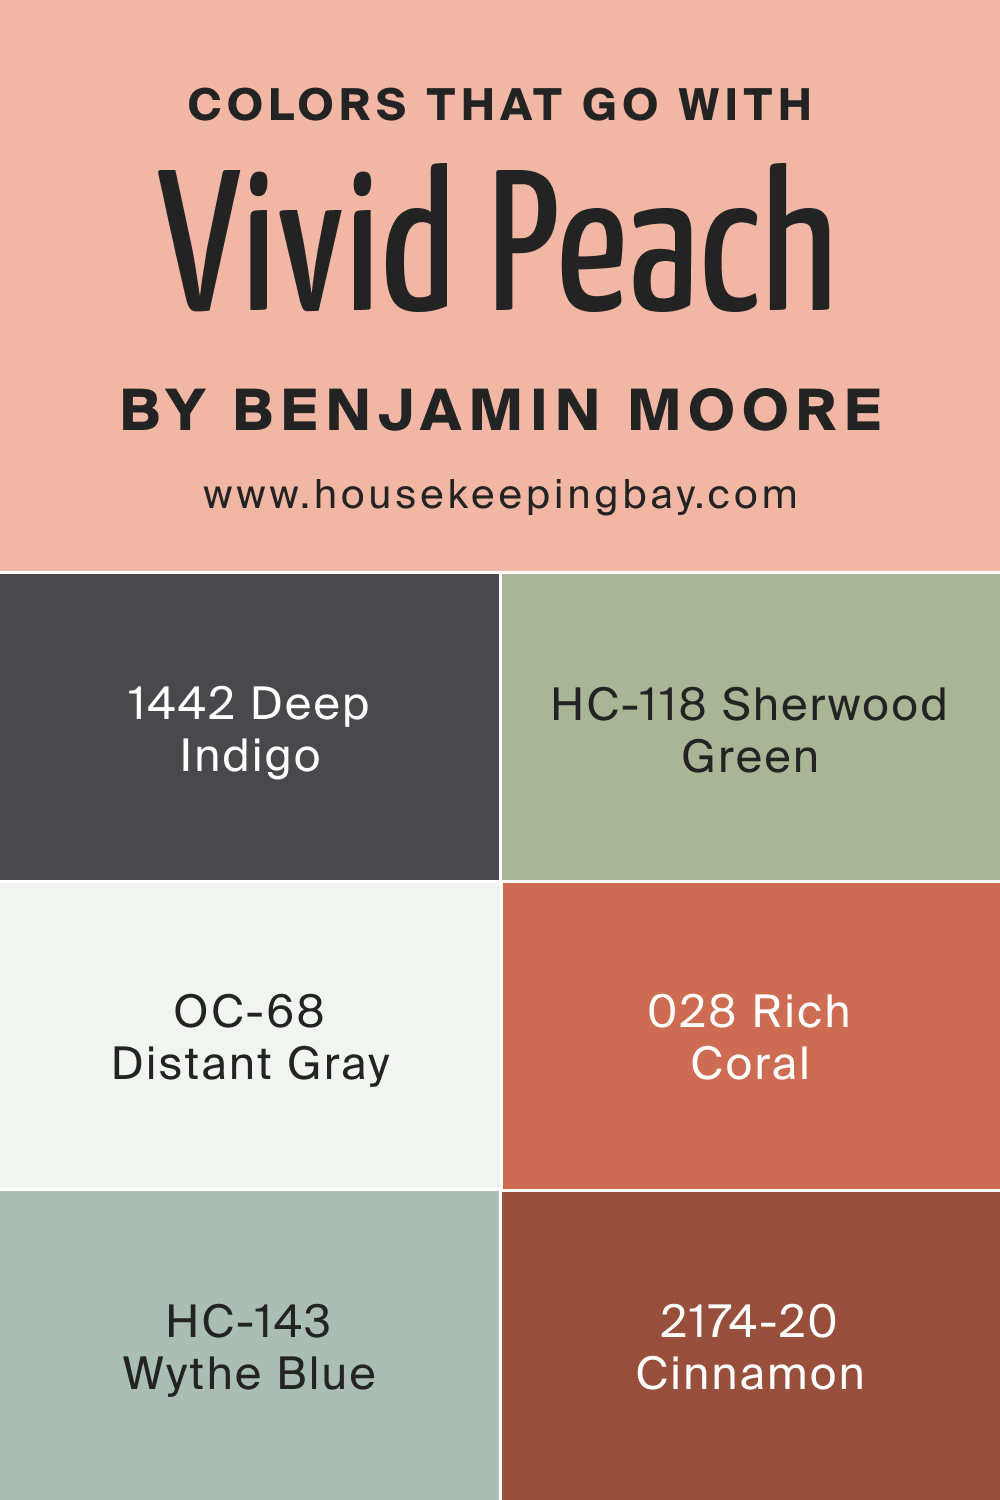 Colors that goes with Vivid Peach 025 by Benjamin Moore